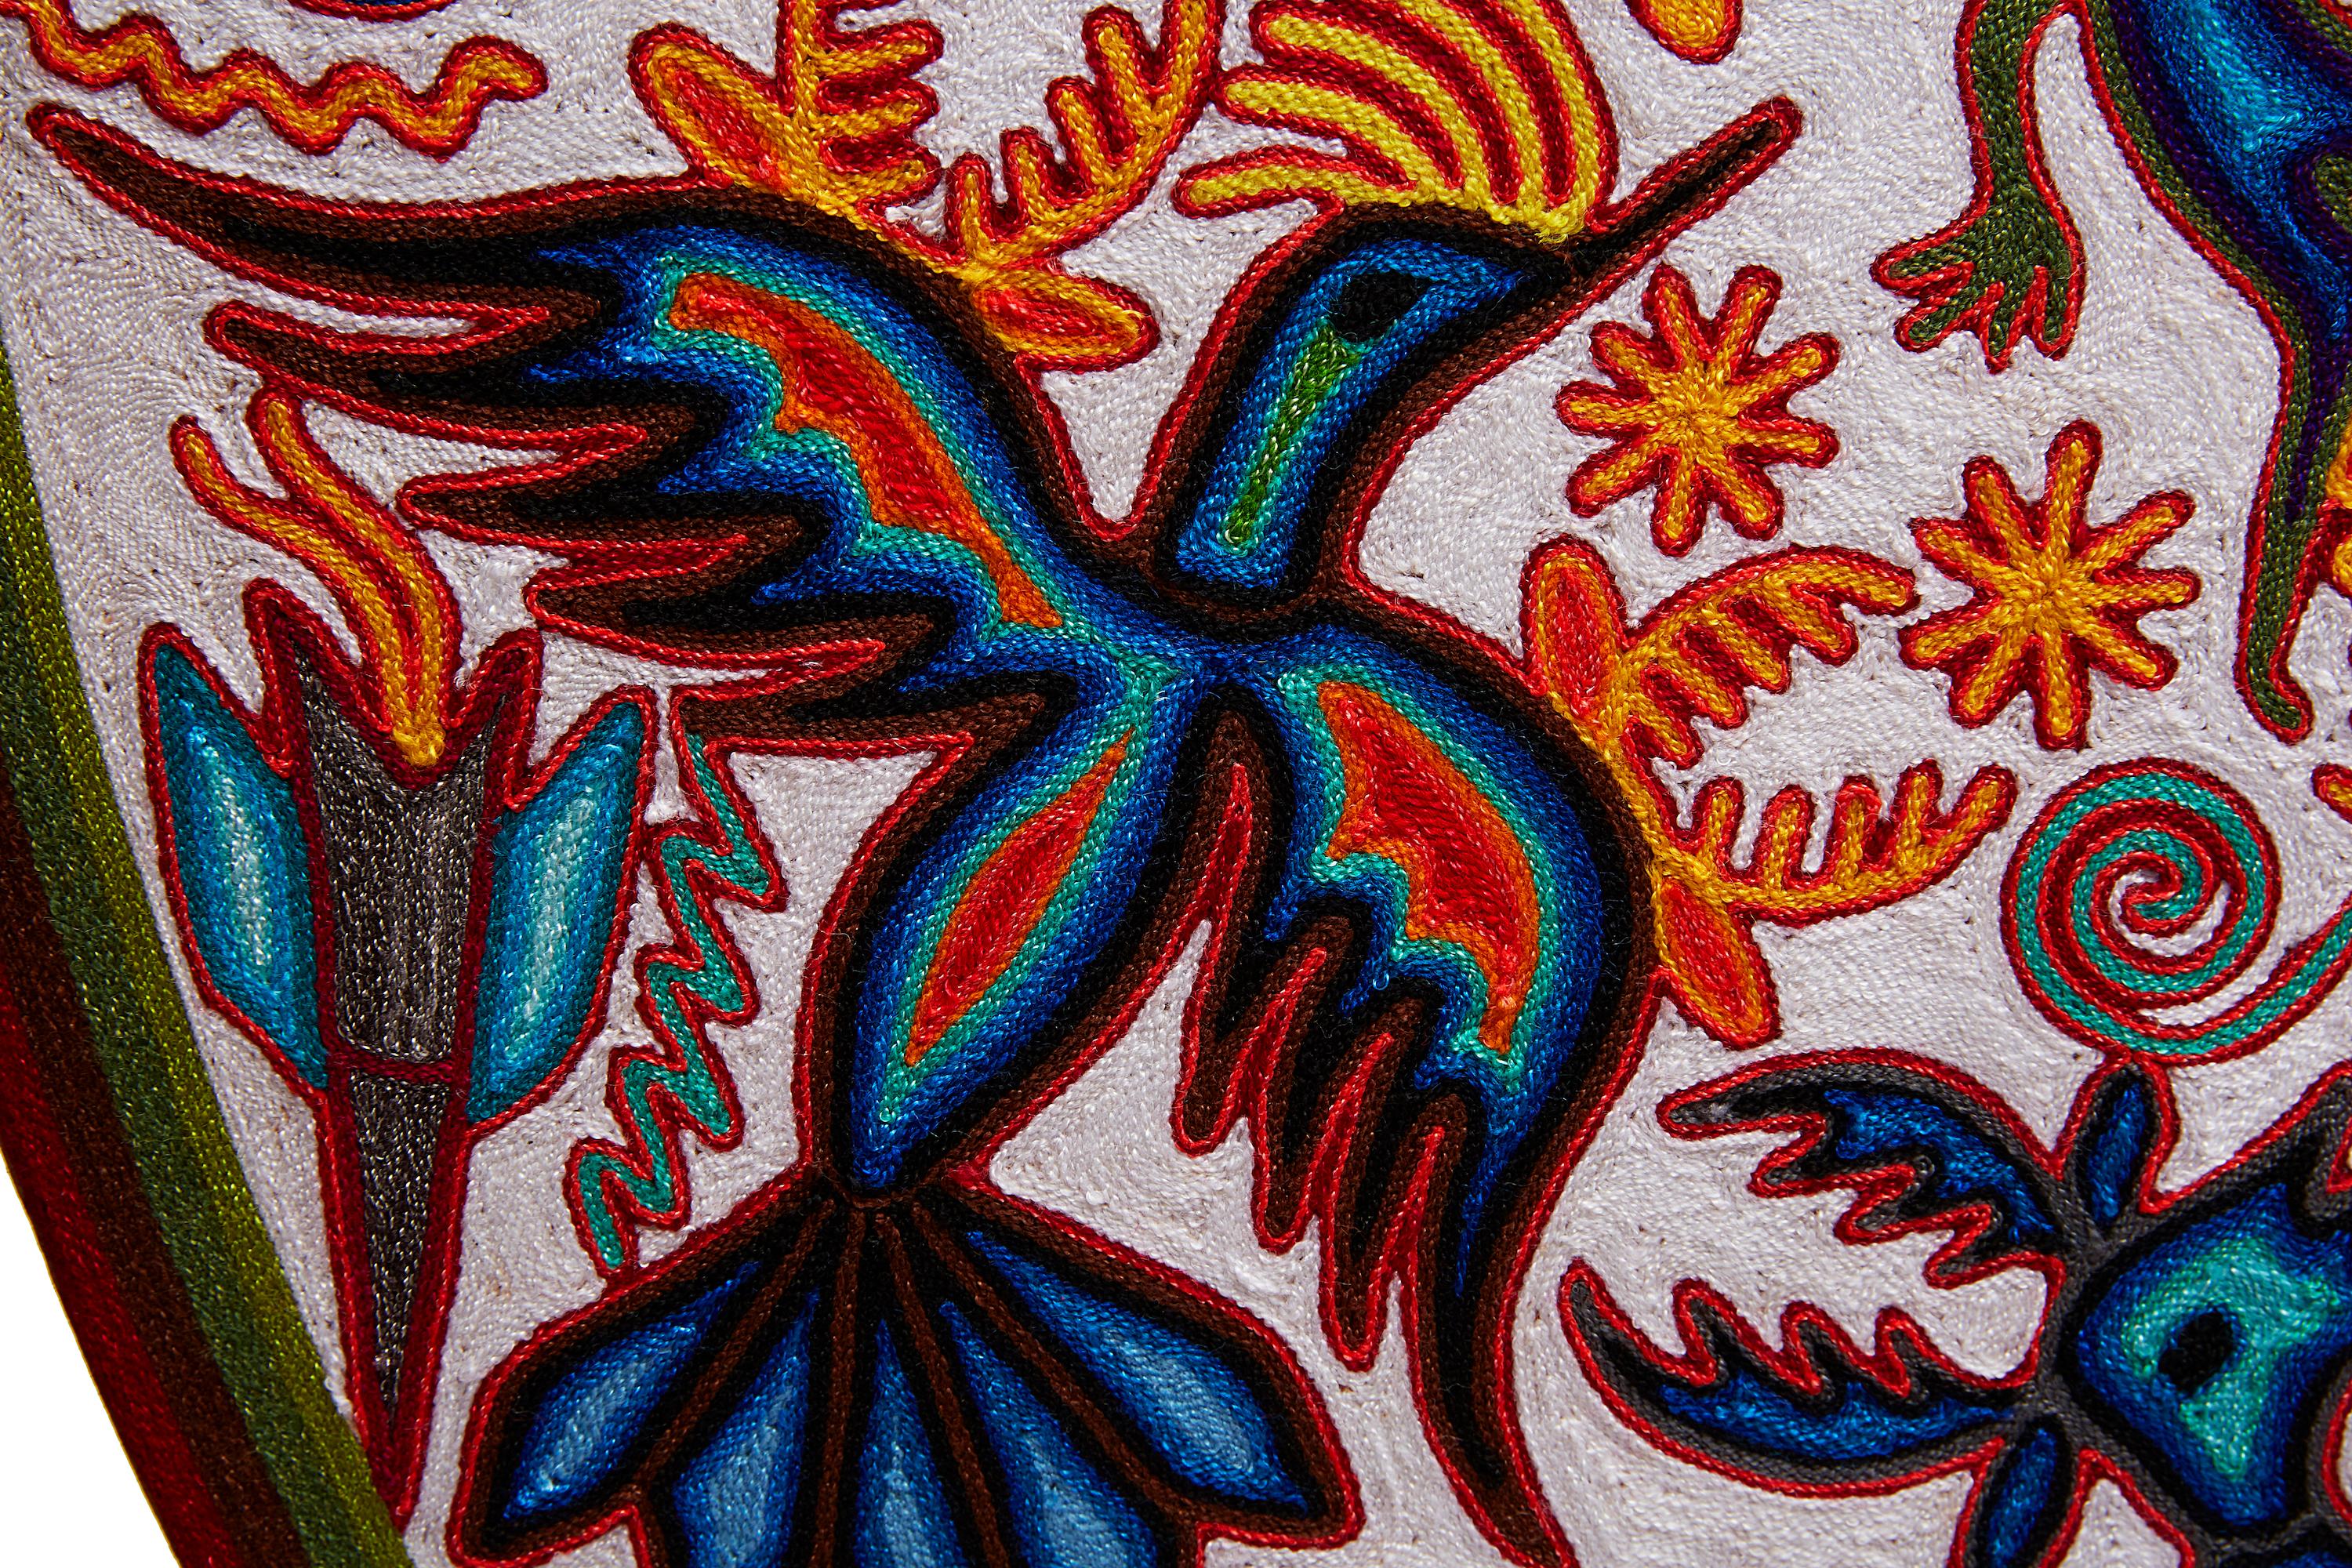 Huichol Indian -  Multicolor Yarn Painting
This hand-embroidered multicolor deer painting is made by Huichol artisans, includes materials such as natural cotton thread, wood, natural glue, and months of work.
At Cactus Fine Art, we offer an